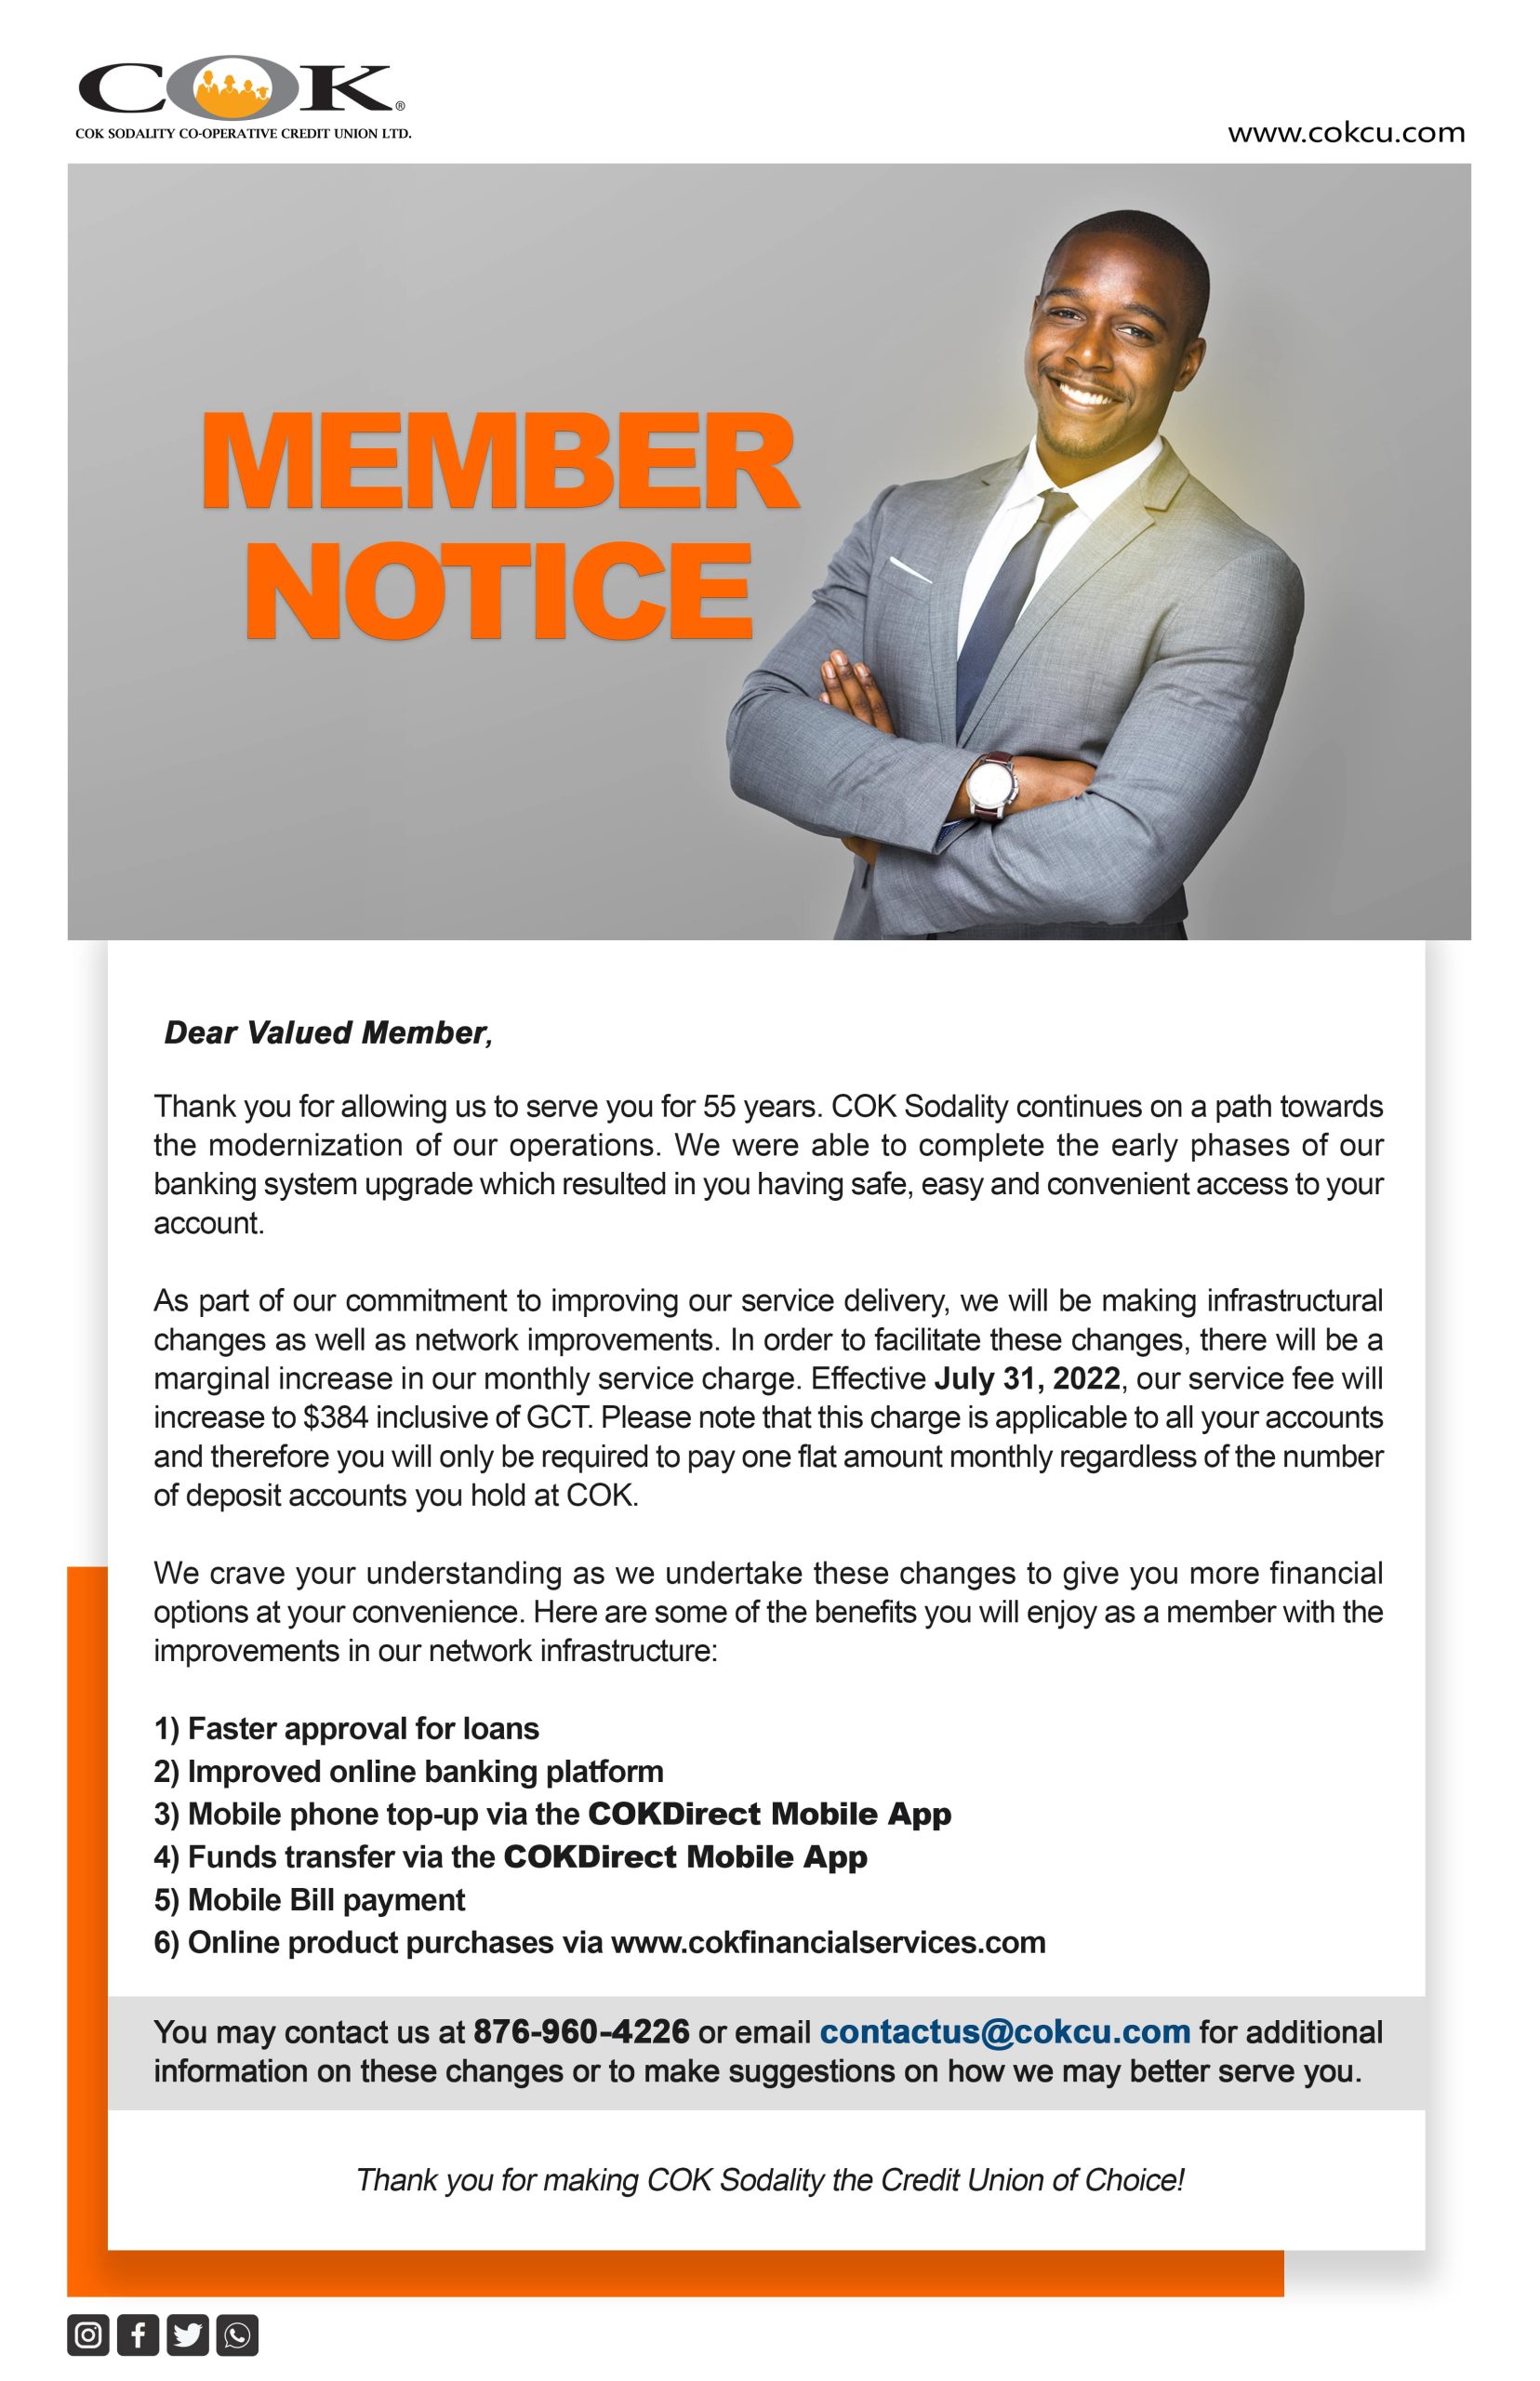 Member Notice - Service Charge Increase